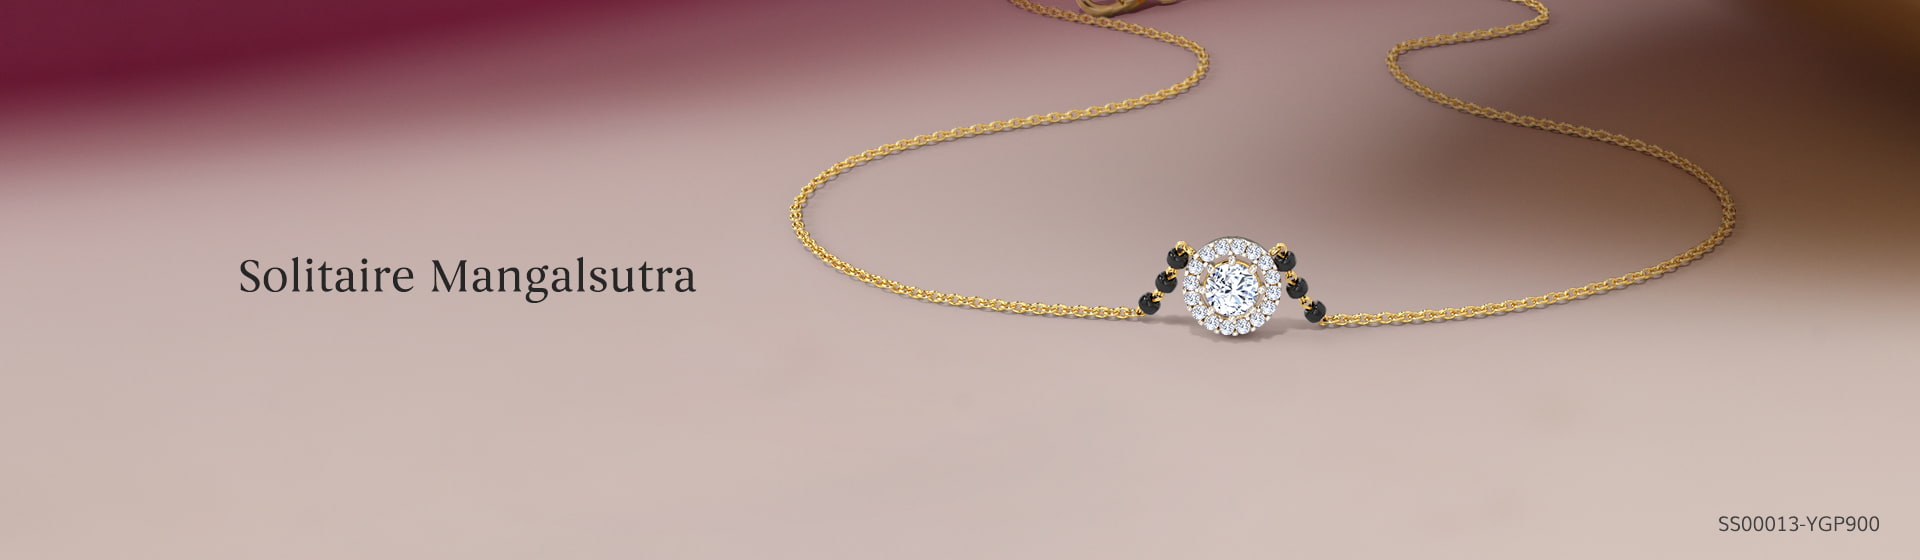 Shop Latest Design Of Solitaire Mangalsutra For Women Online